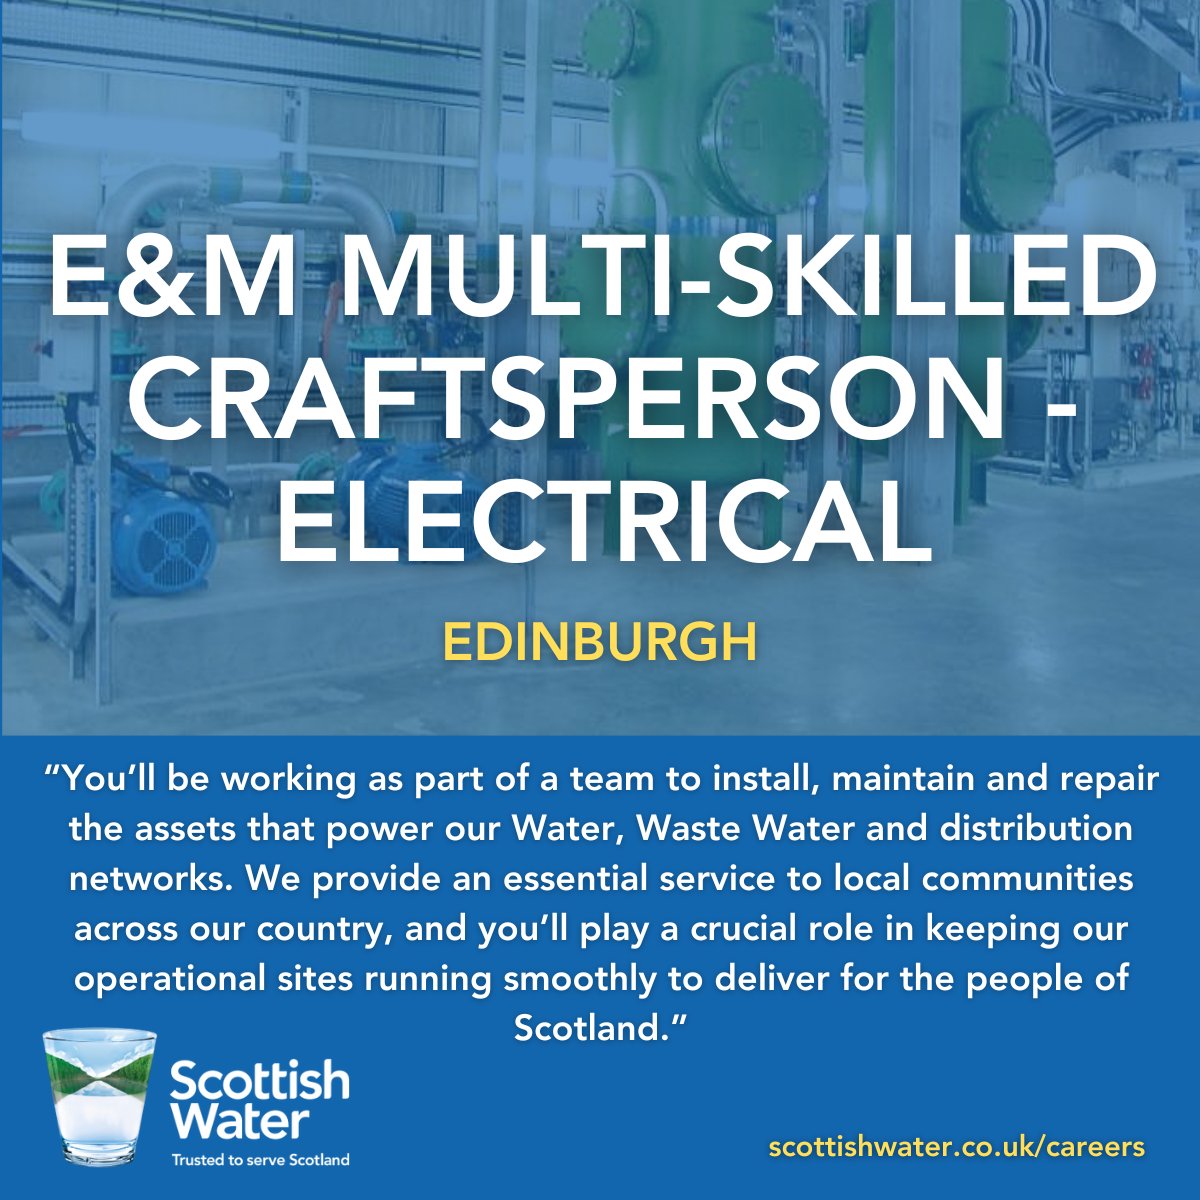 Keep our operational sites running smoothly by installing, maintaining, and repairing our water and wastewater assets. Use your electrical and mechanical skills to troubleshoot and ensure safety is paramount. bit.ly/3PNMcZ8 #EdinburghJobs #ElectricalJobs